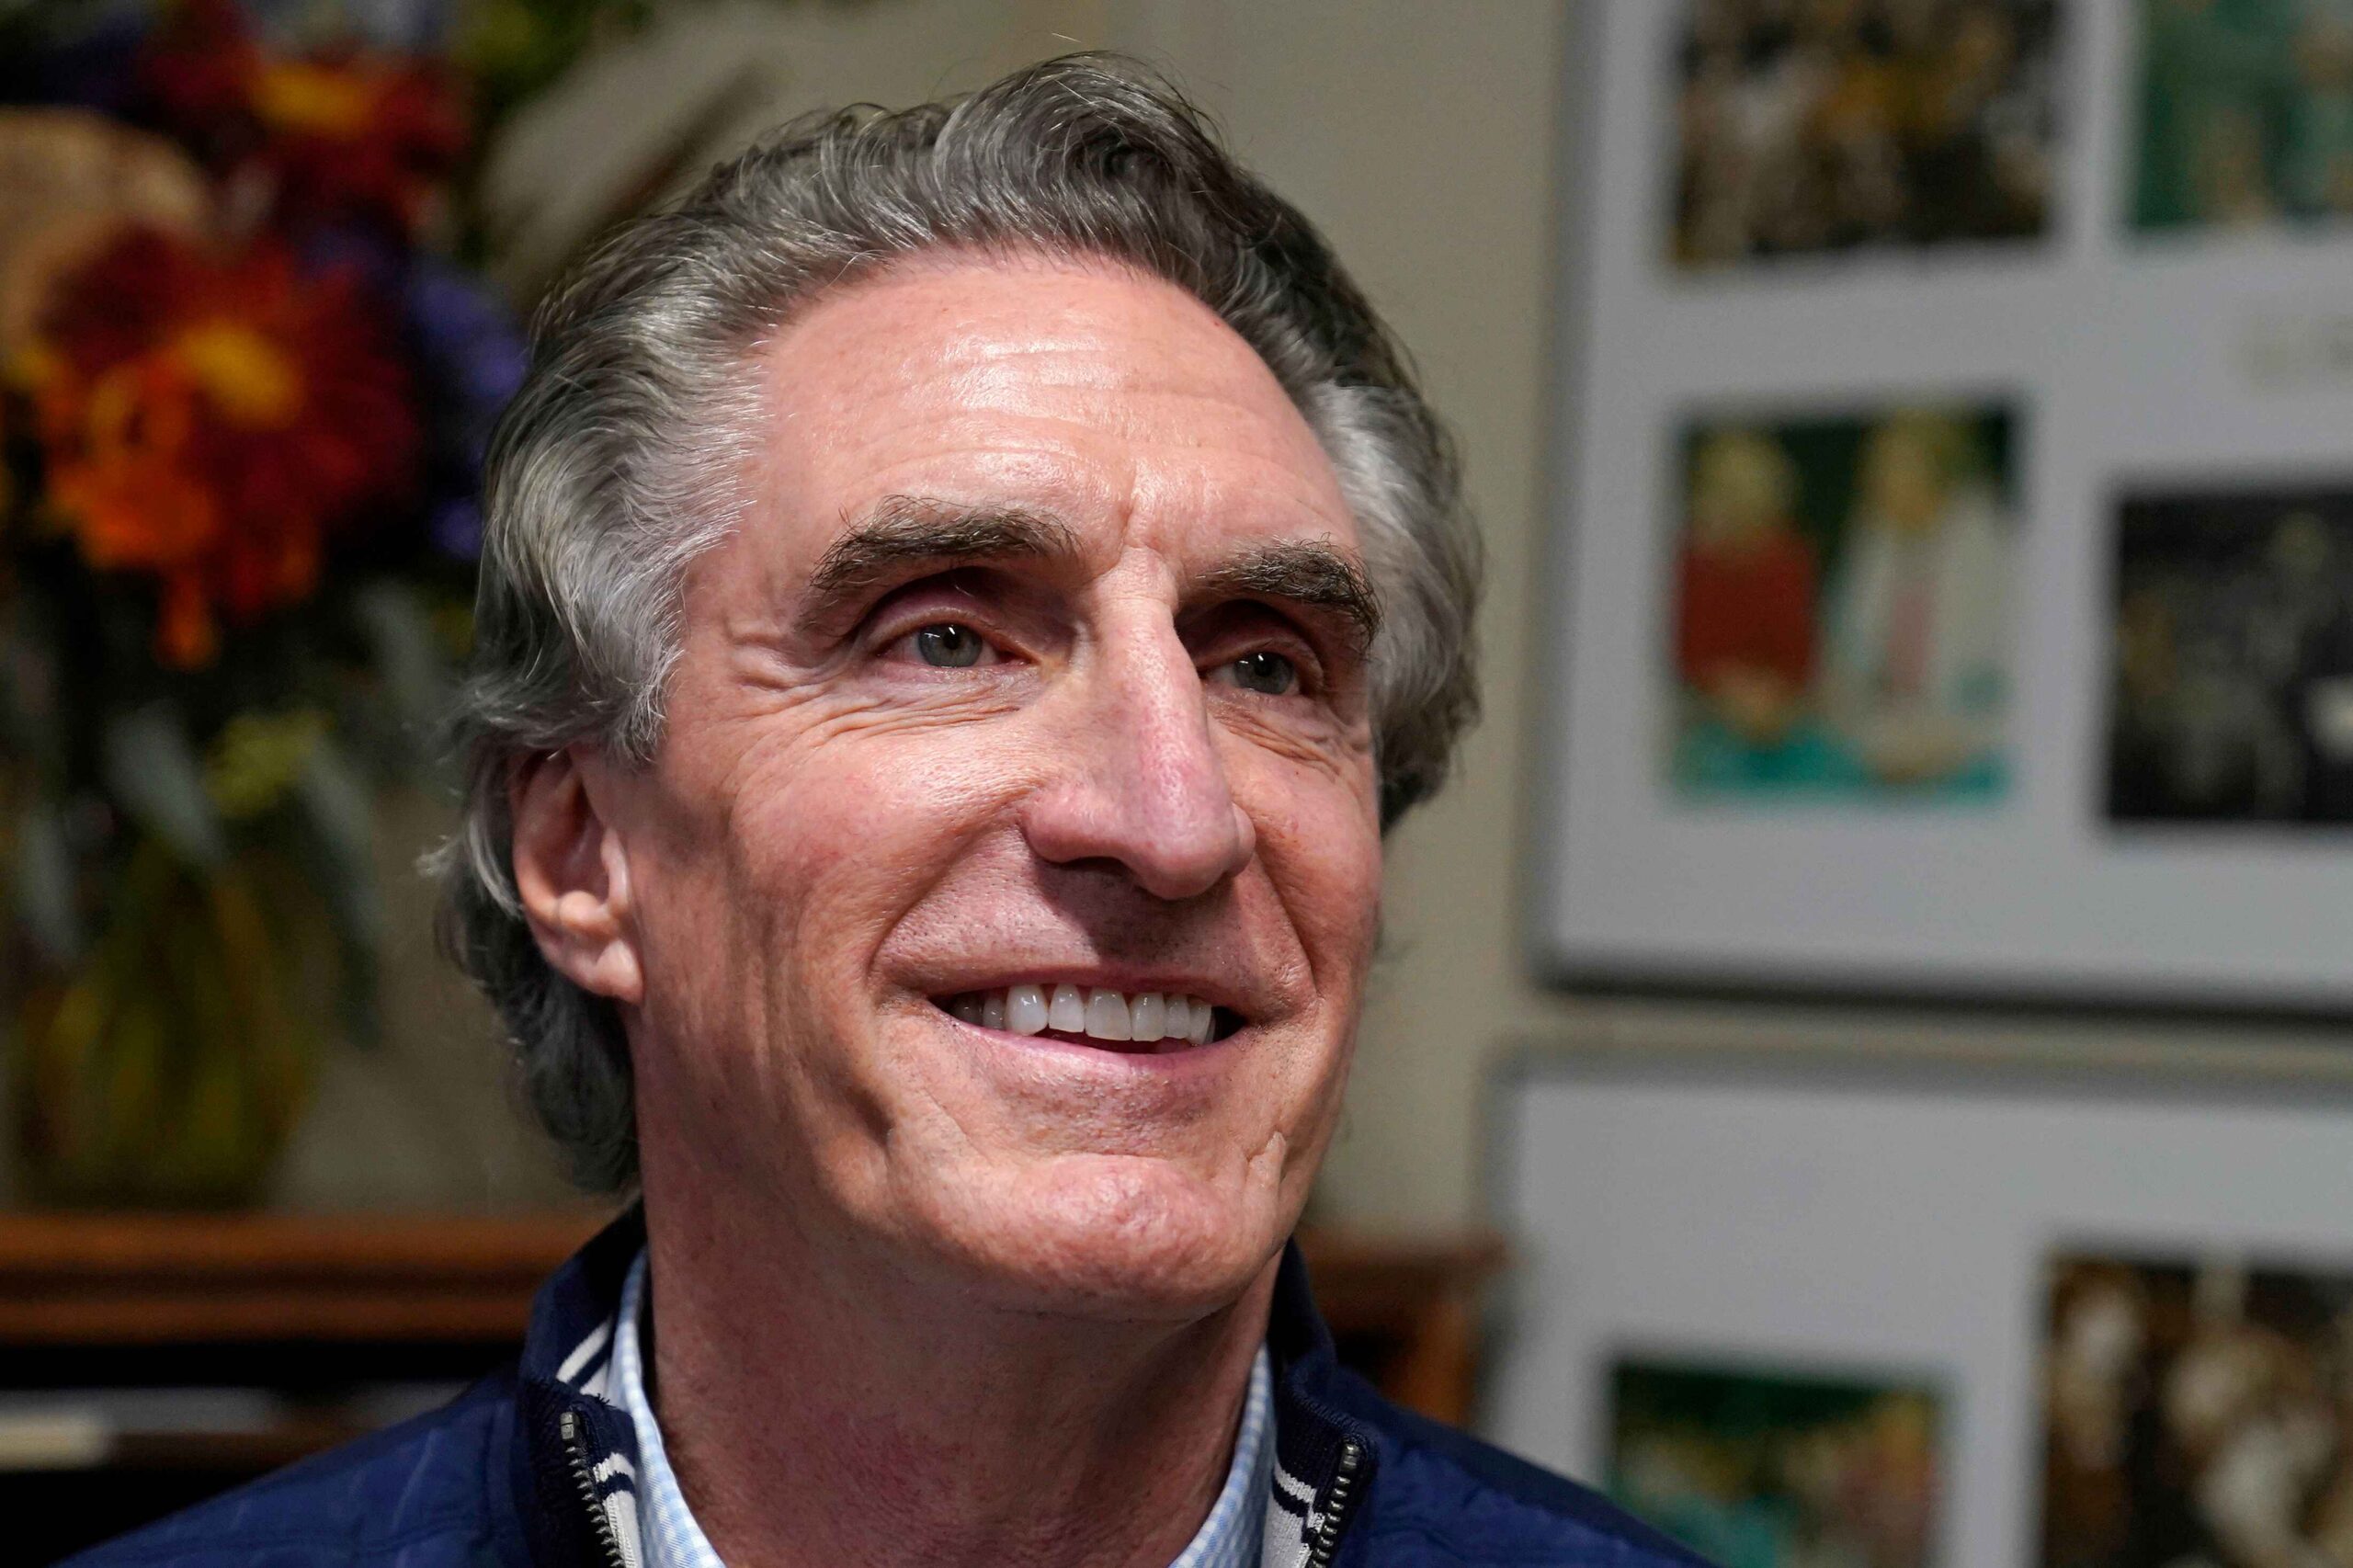 North Dakota Governor Doug Burgum is suspending his presidential campaign ahead of the fourth Republican primary debate after struggling to gain an advantage. (AP Photo/Charles Krupa)